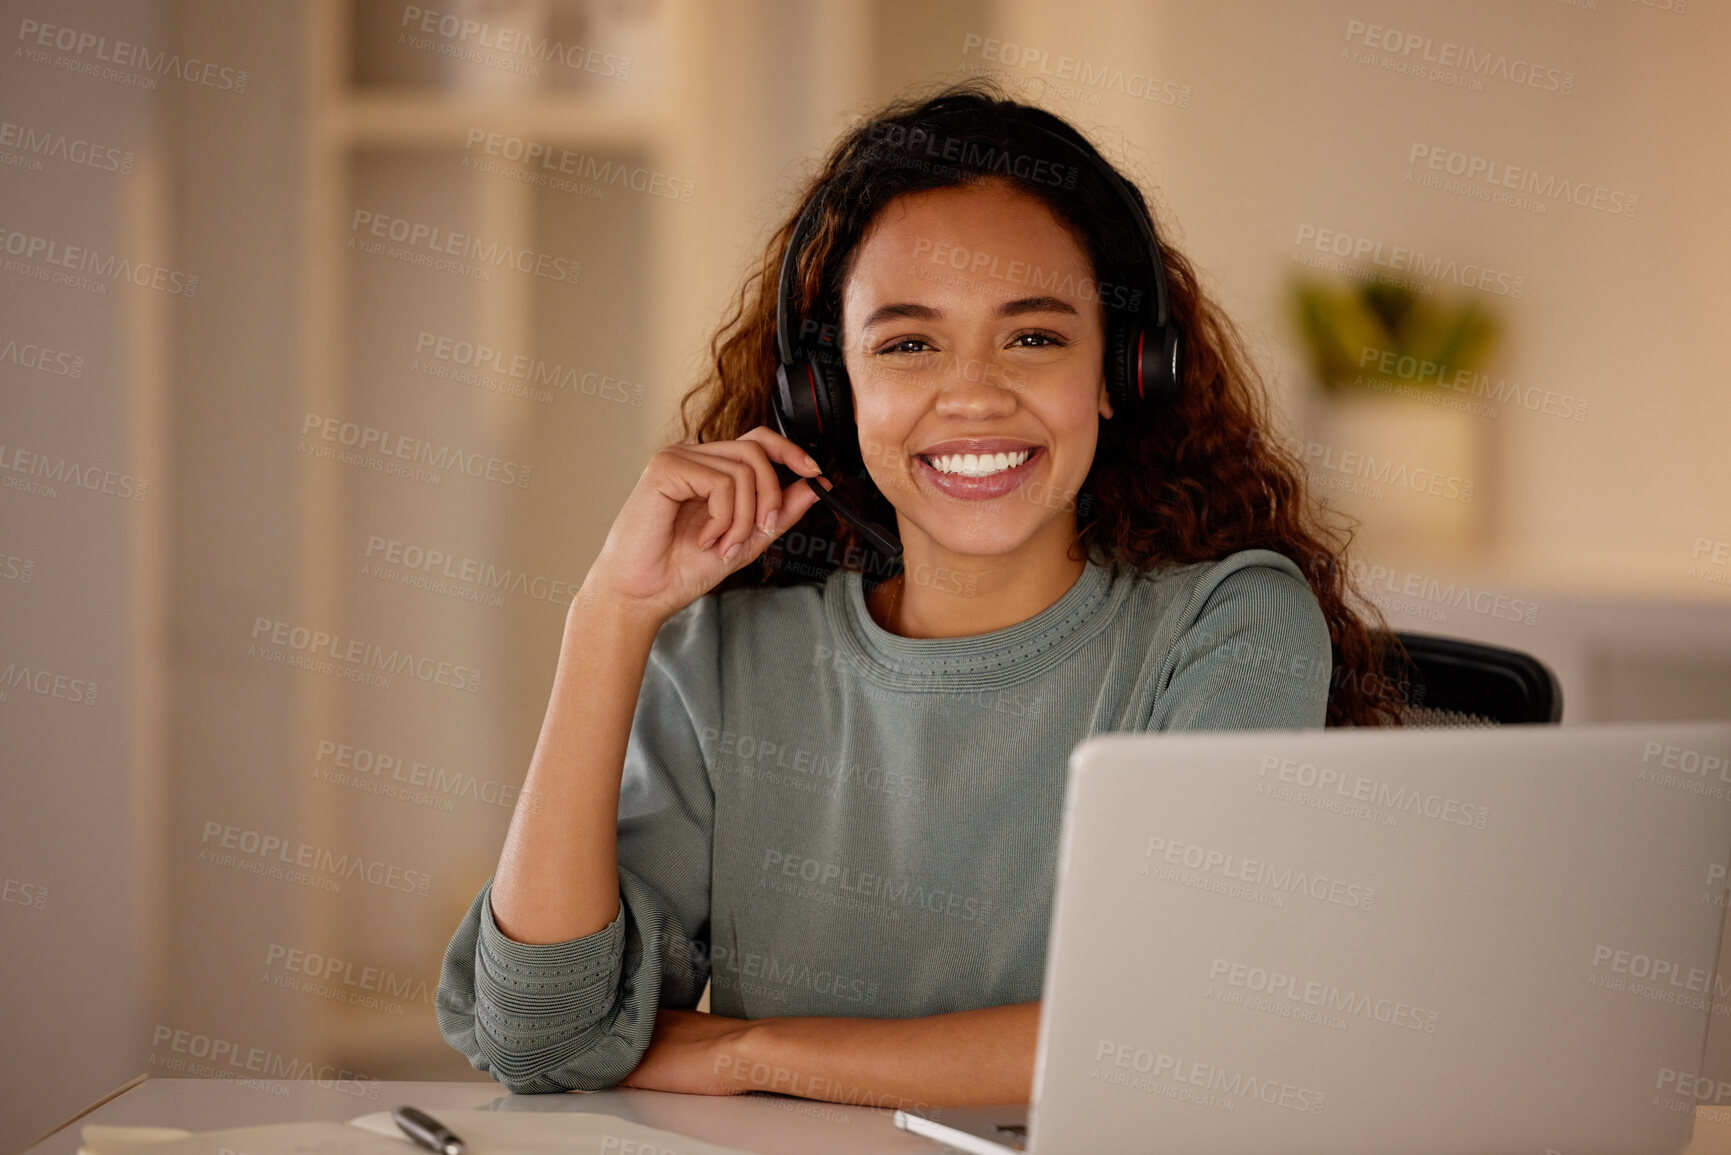 Buy stock photo One young woman using headset and working late on a laptop in an office. Happy woman doing freelance work as a call centre agent. Consultant operating a helpdesk for customer care, sales and support